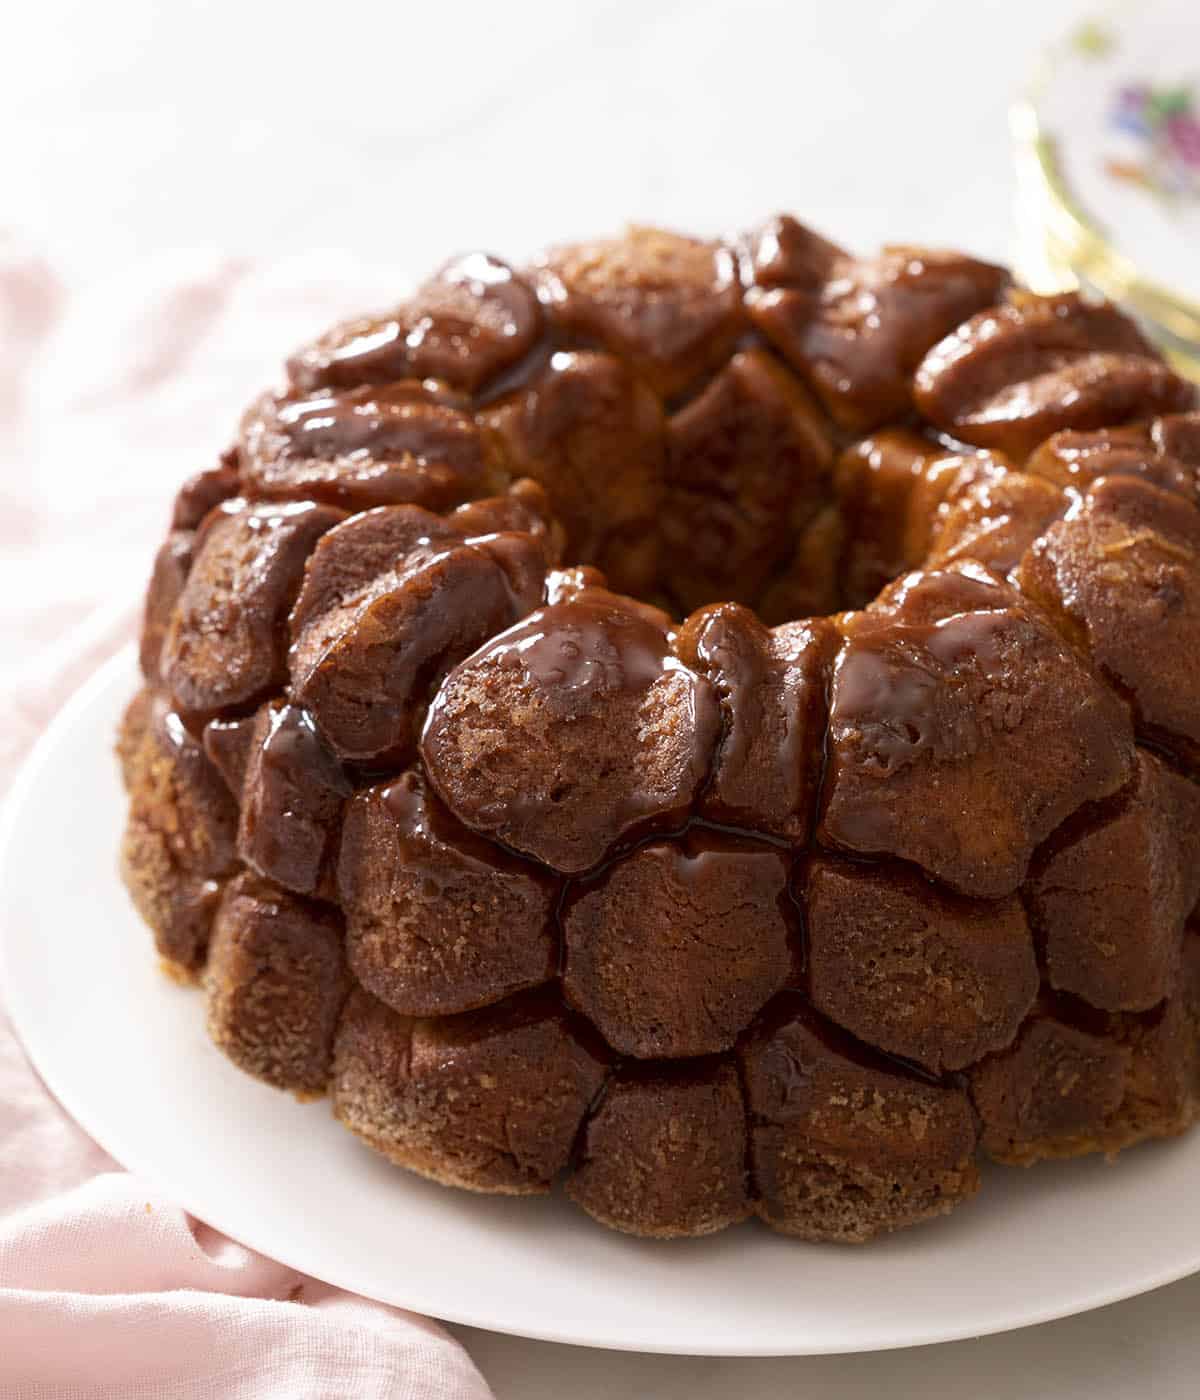 Monkey bread glistening with caramel on a plate.